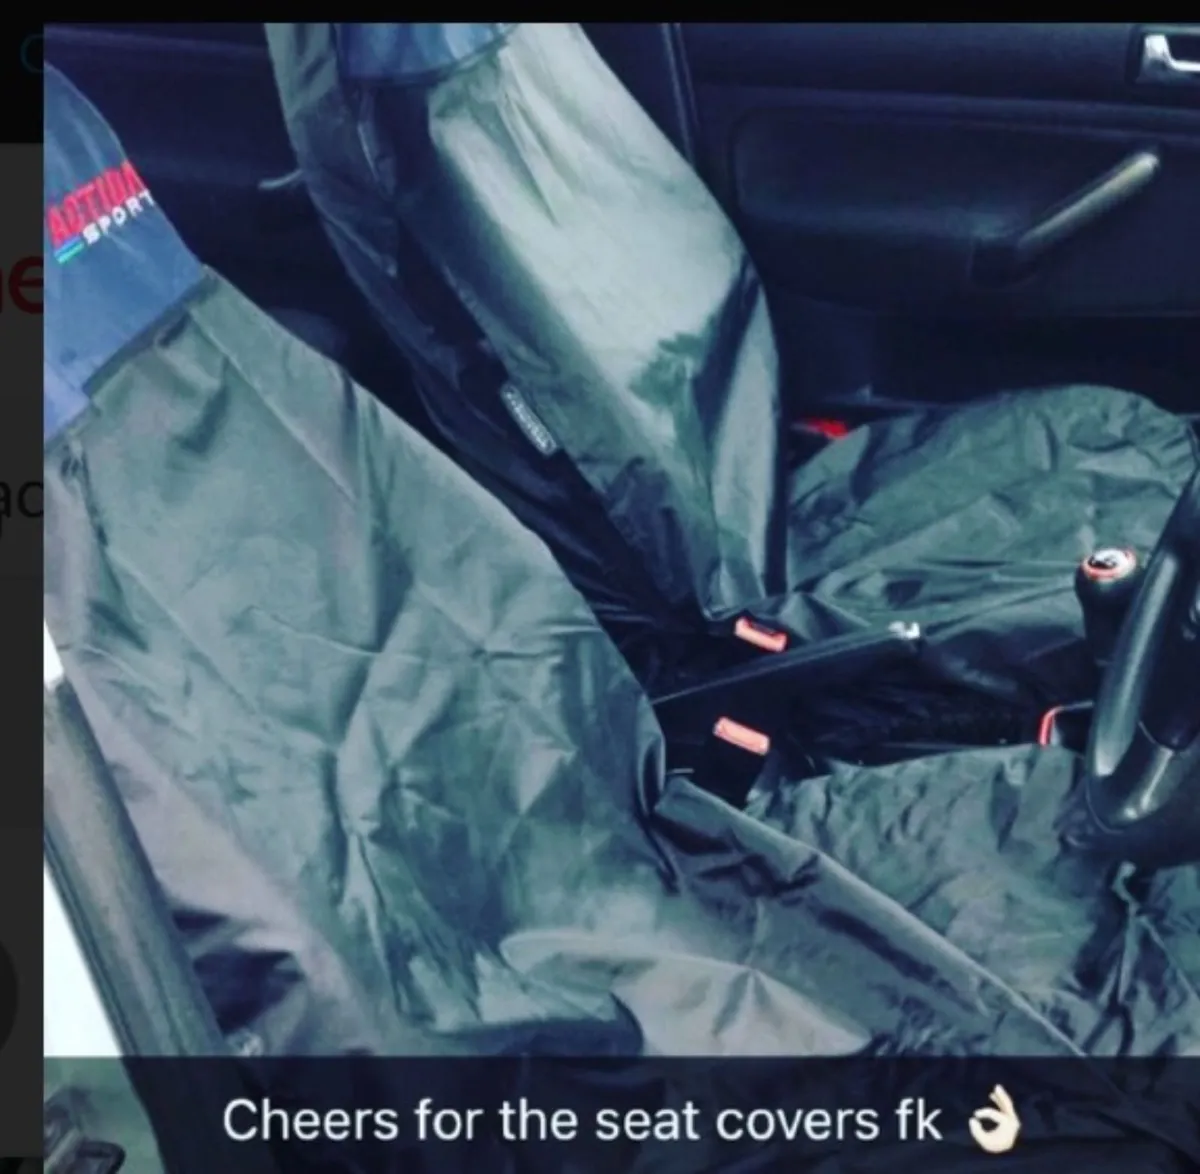 Action sport seat covers offer